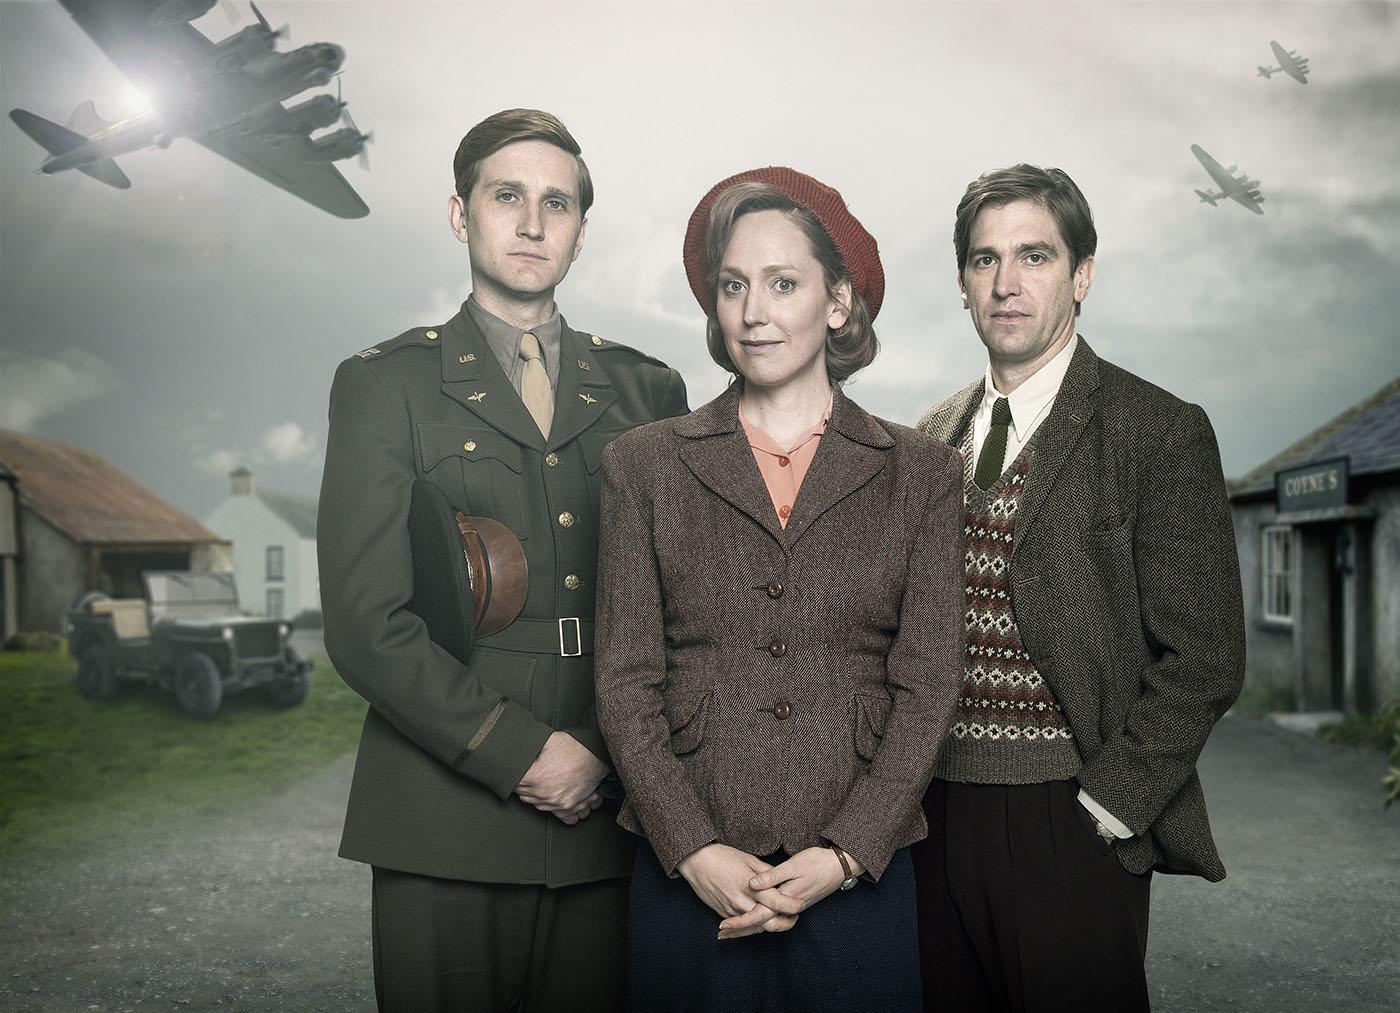 Aaron Staton, Hattie Morahan, and Owen McDonnell in 'My Mother and Other Strangers.' Photo: Steffan Hill/BBC 2016 for MASTERPIECE